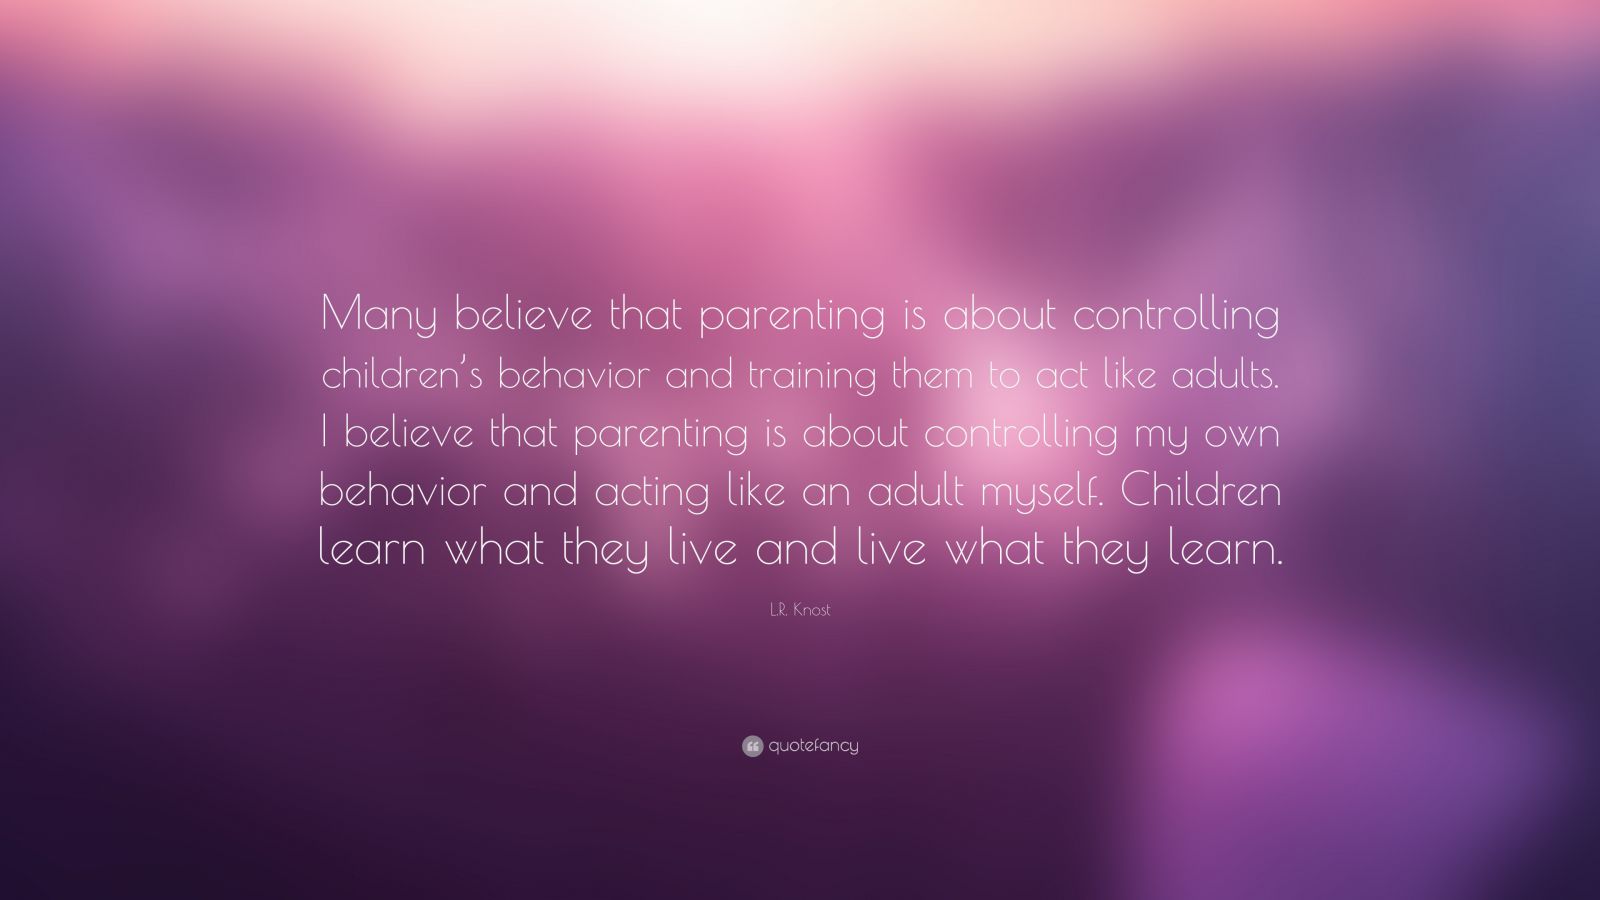 Effective parenting in the 21st Century: Part 2